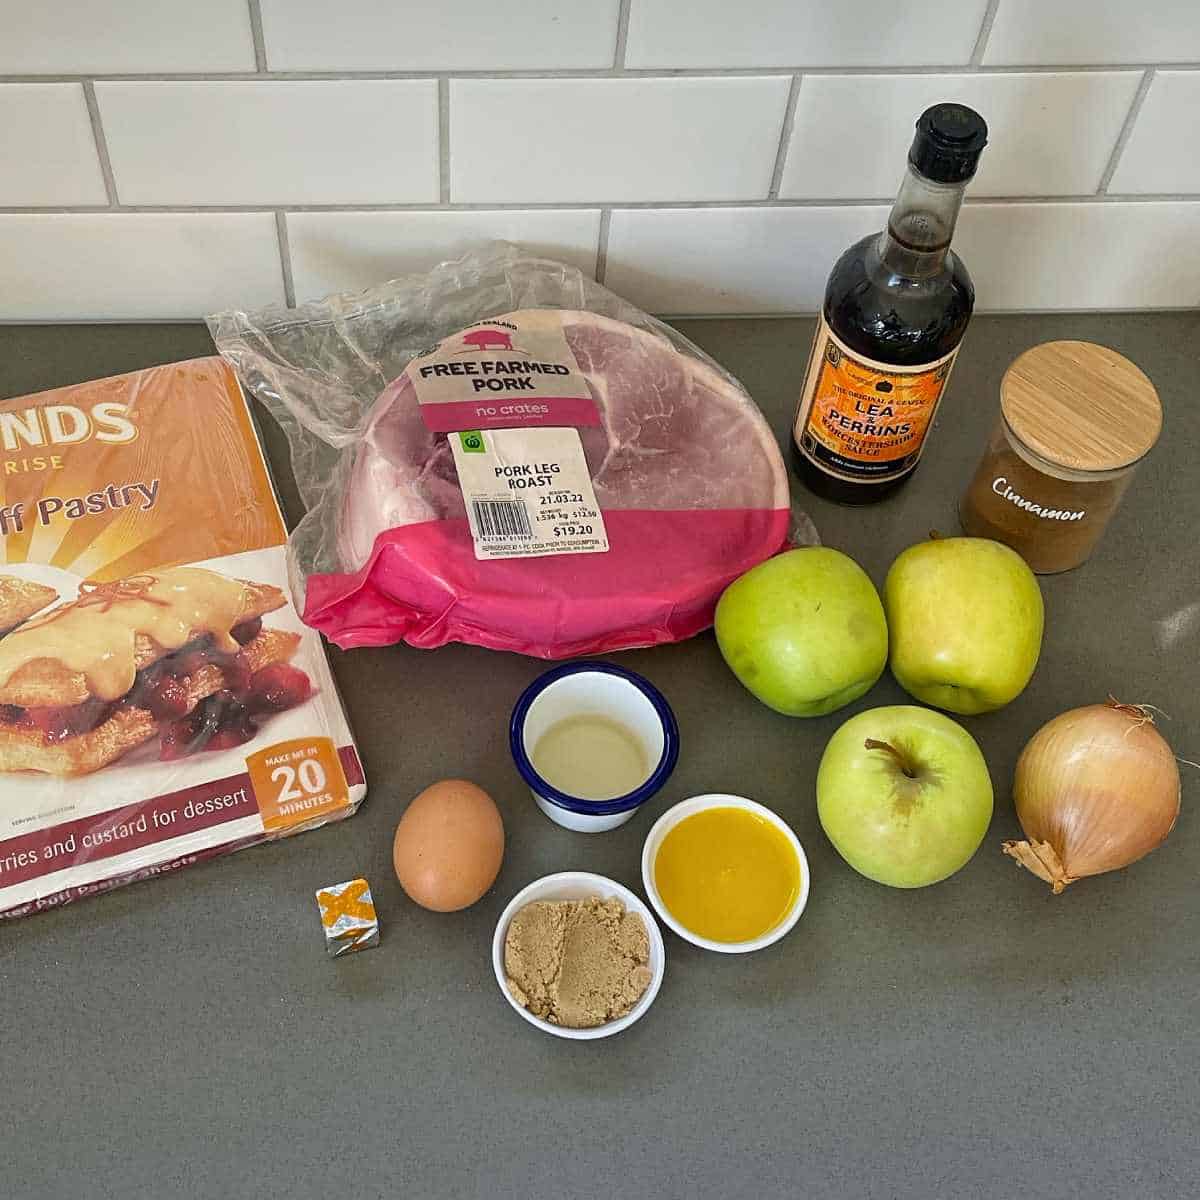 Ingredients for pulled pork and apple pie sitting on a grey bench top